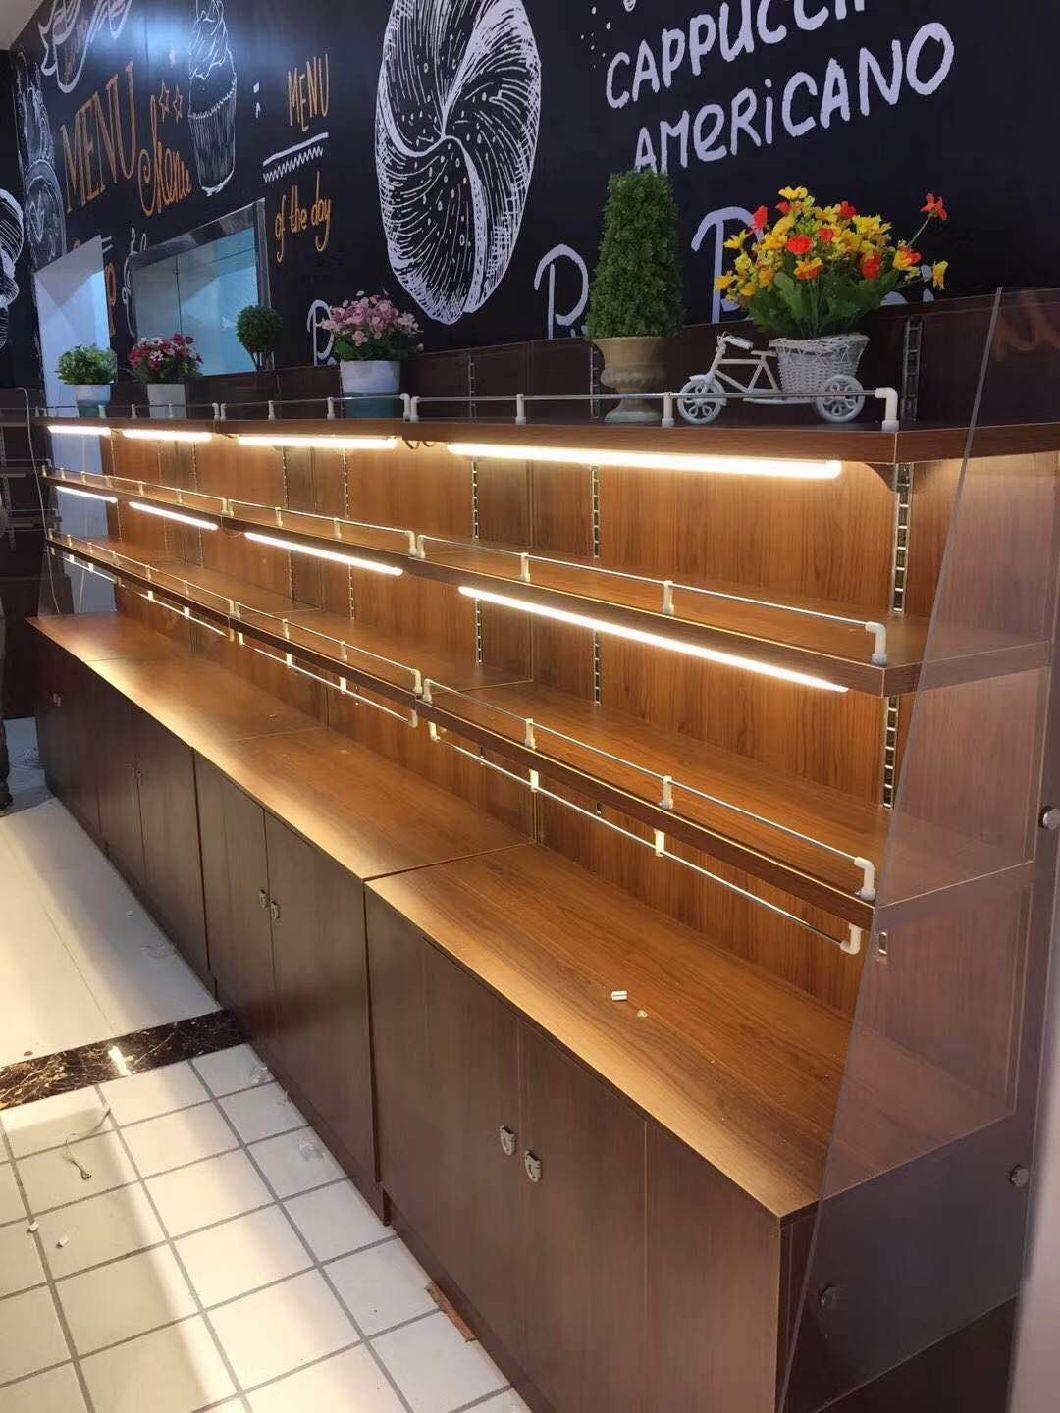 Bread Display Cabinet with Carton Cart Modeling and Glass Cover Showcase Perfect for Bakery Sales and Display